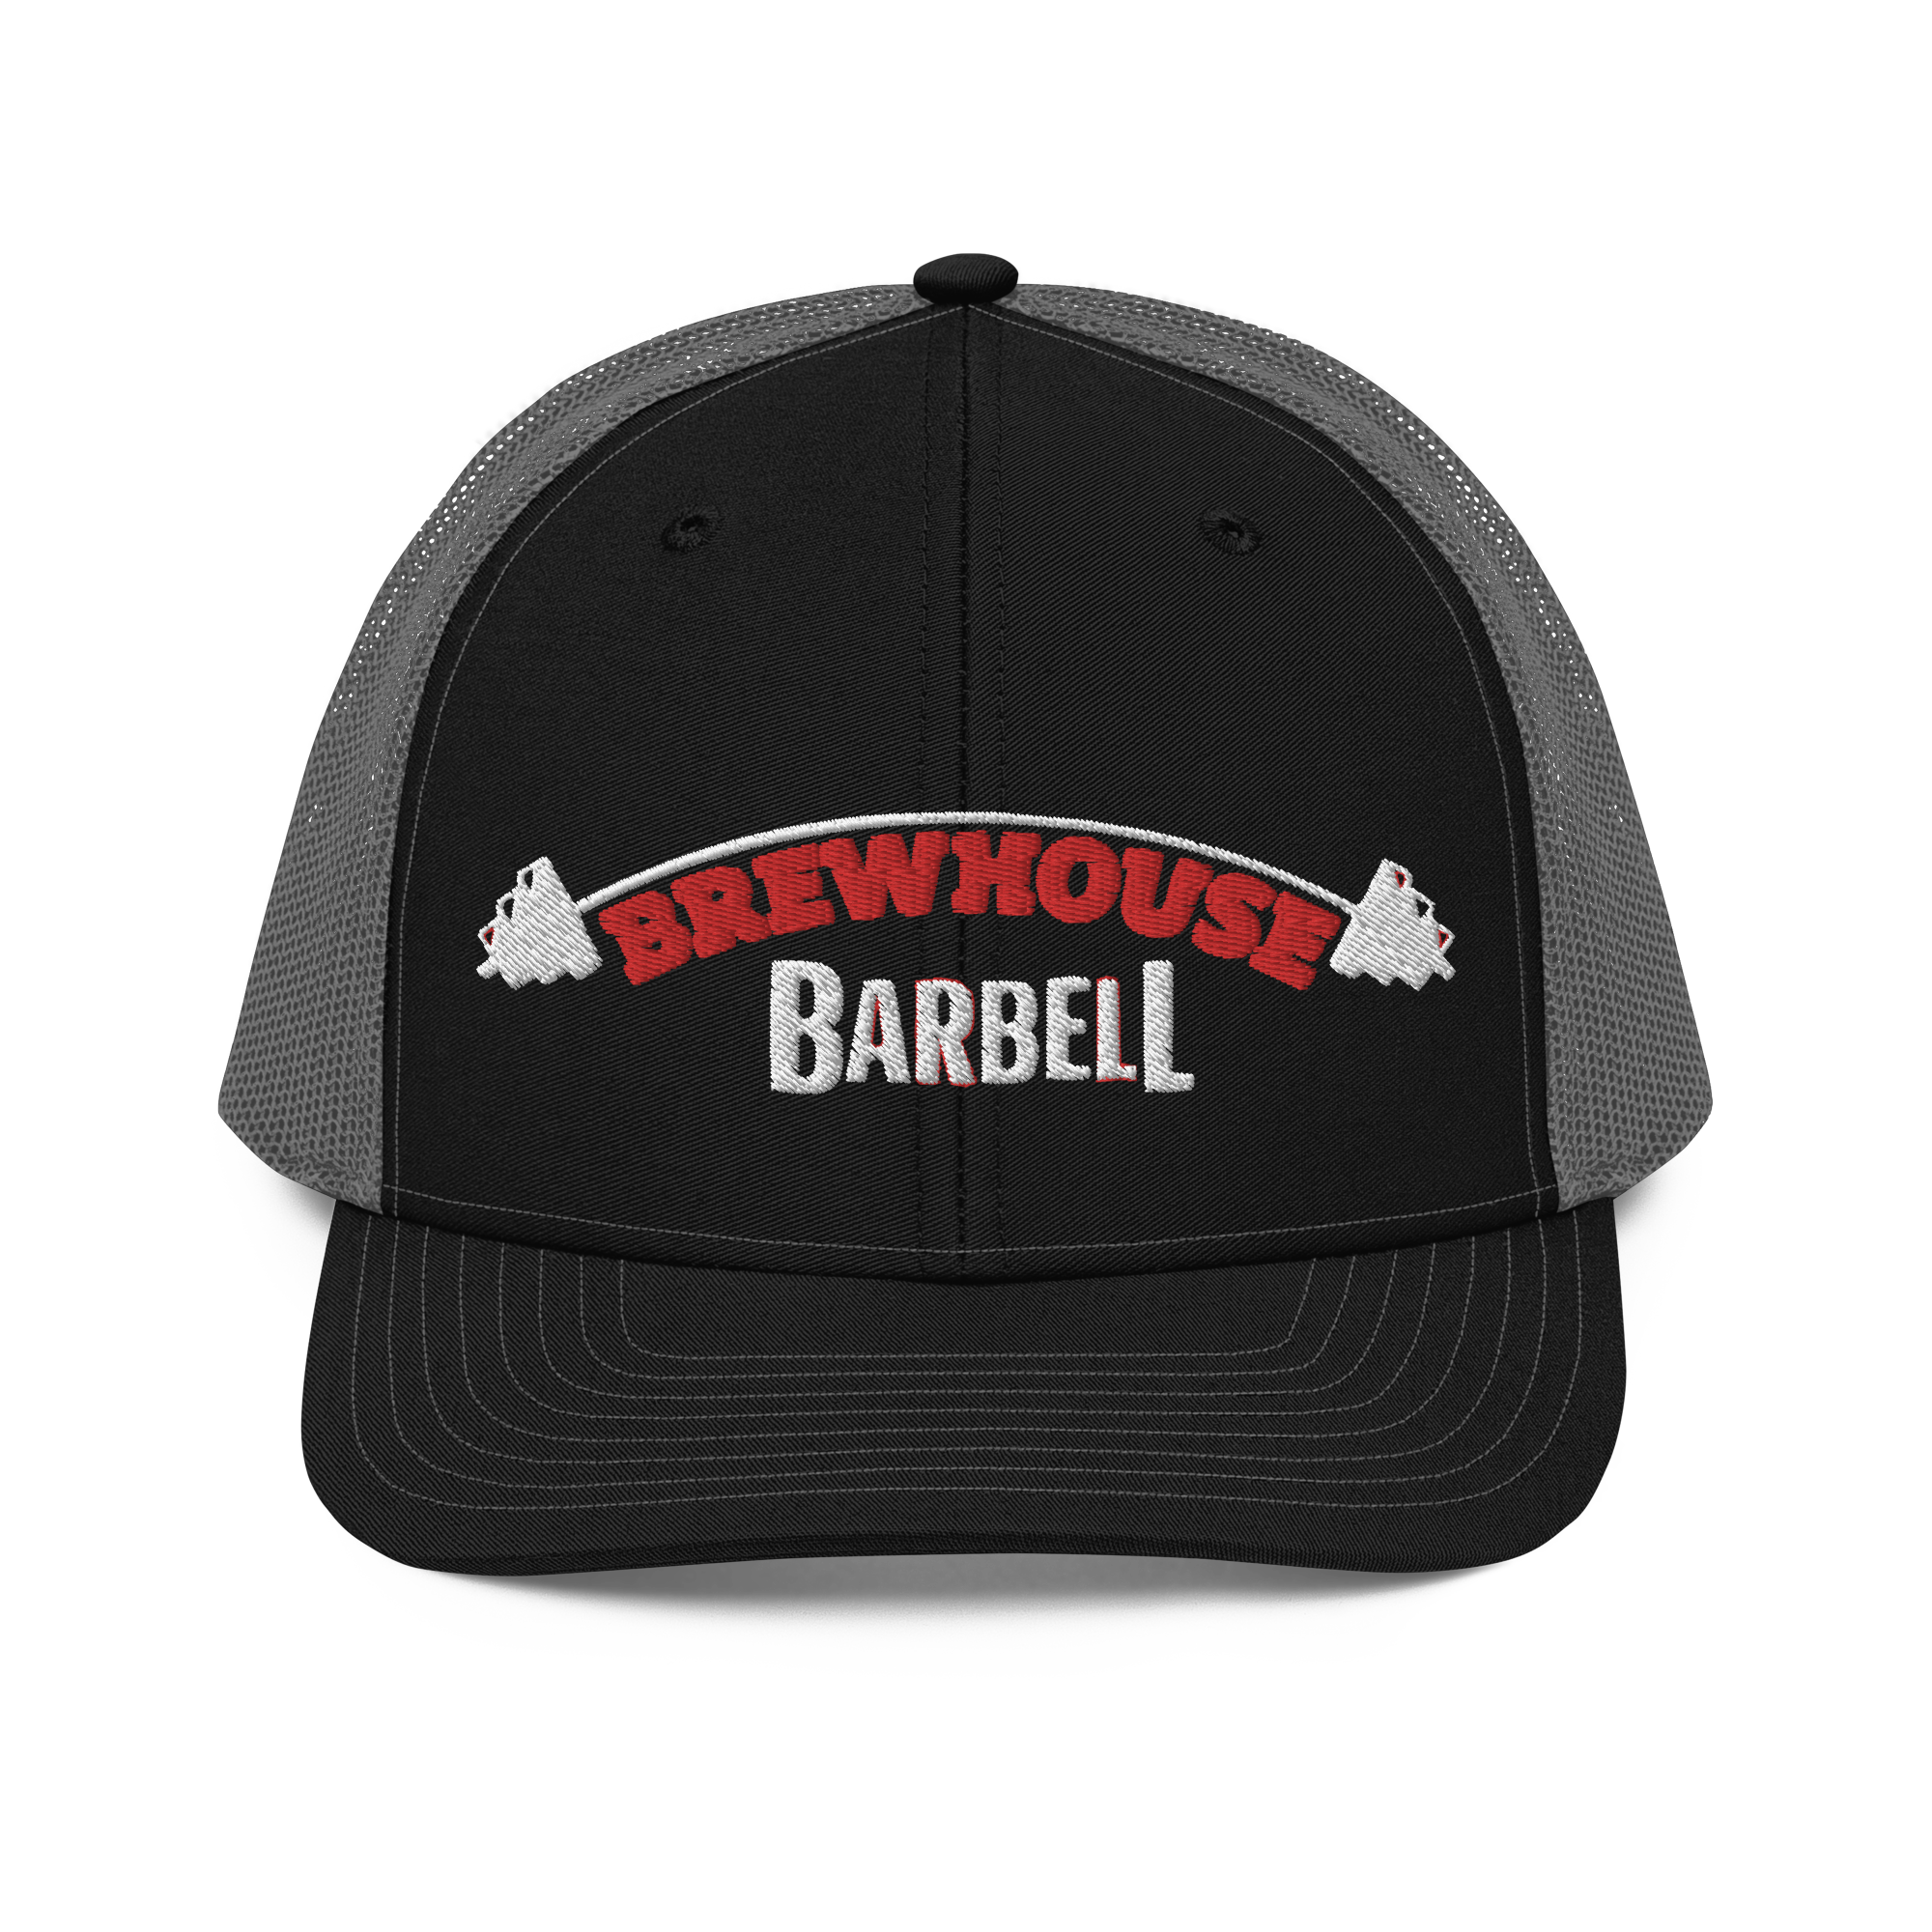 Brewhouse Barbell Trucker Cap